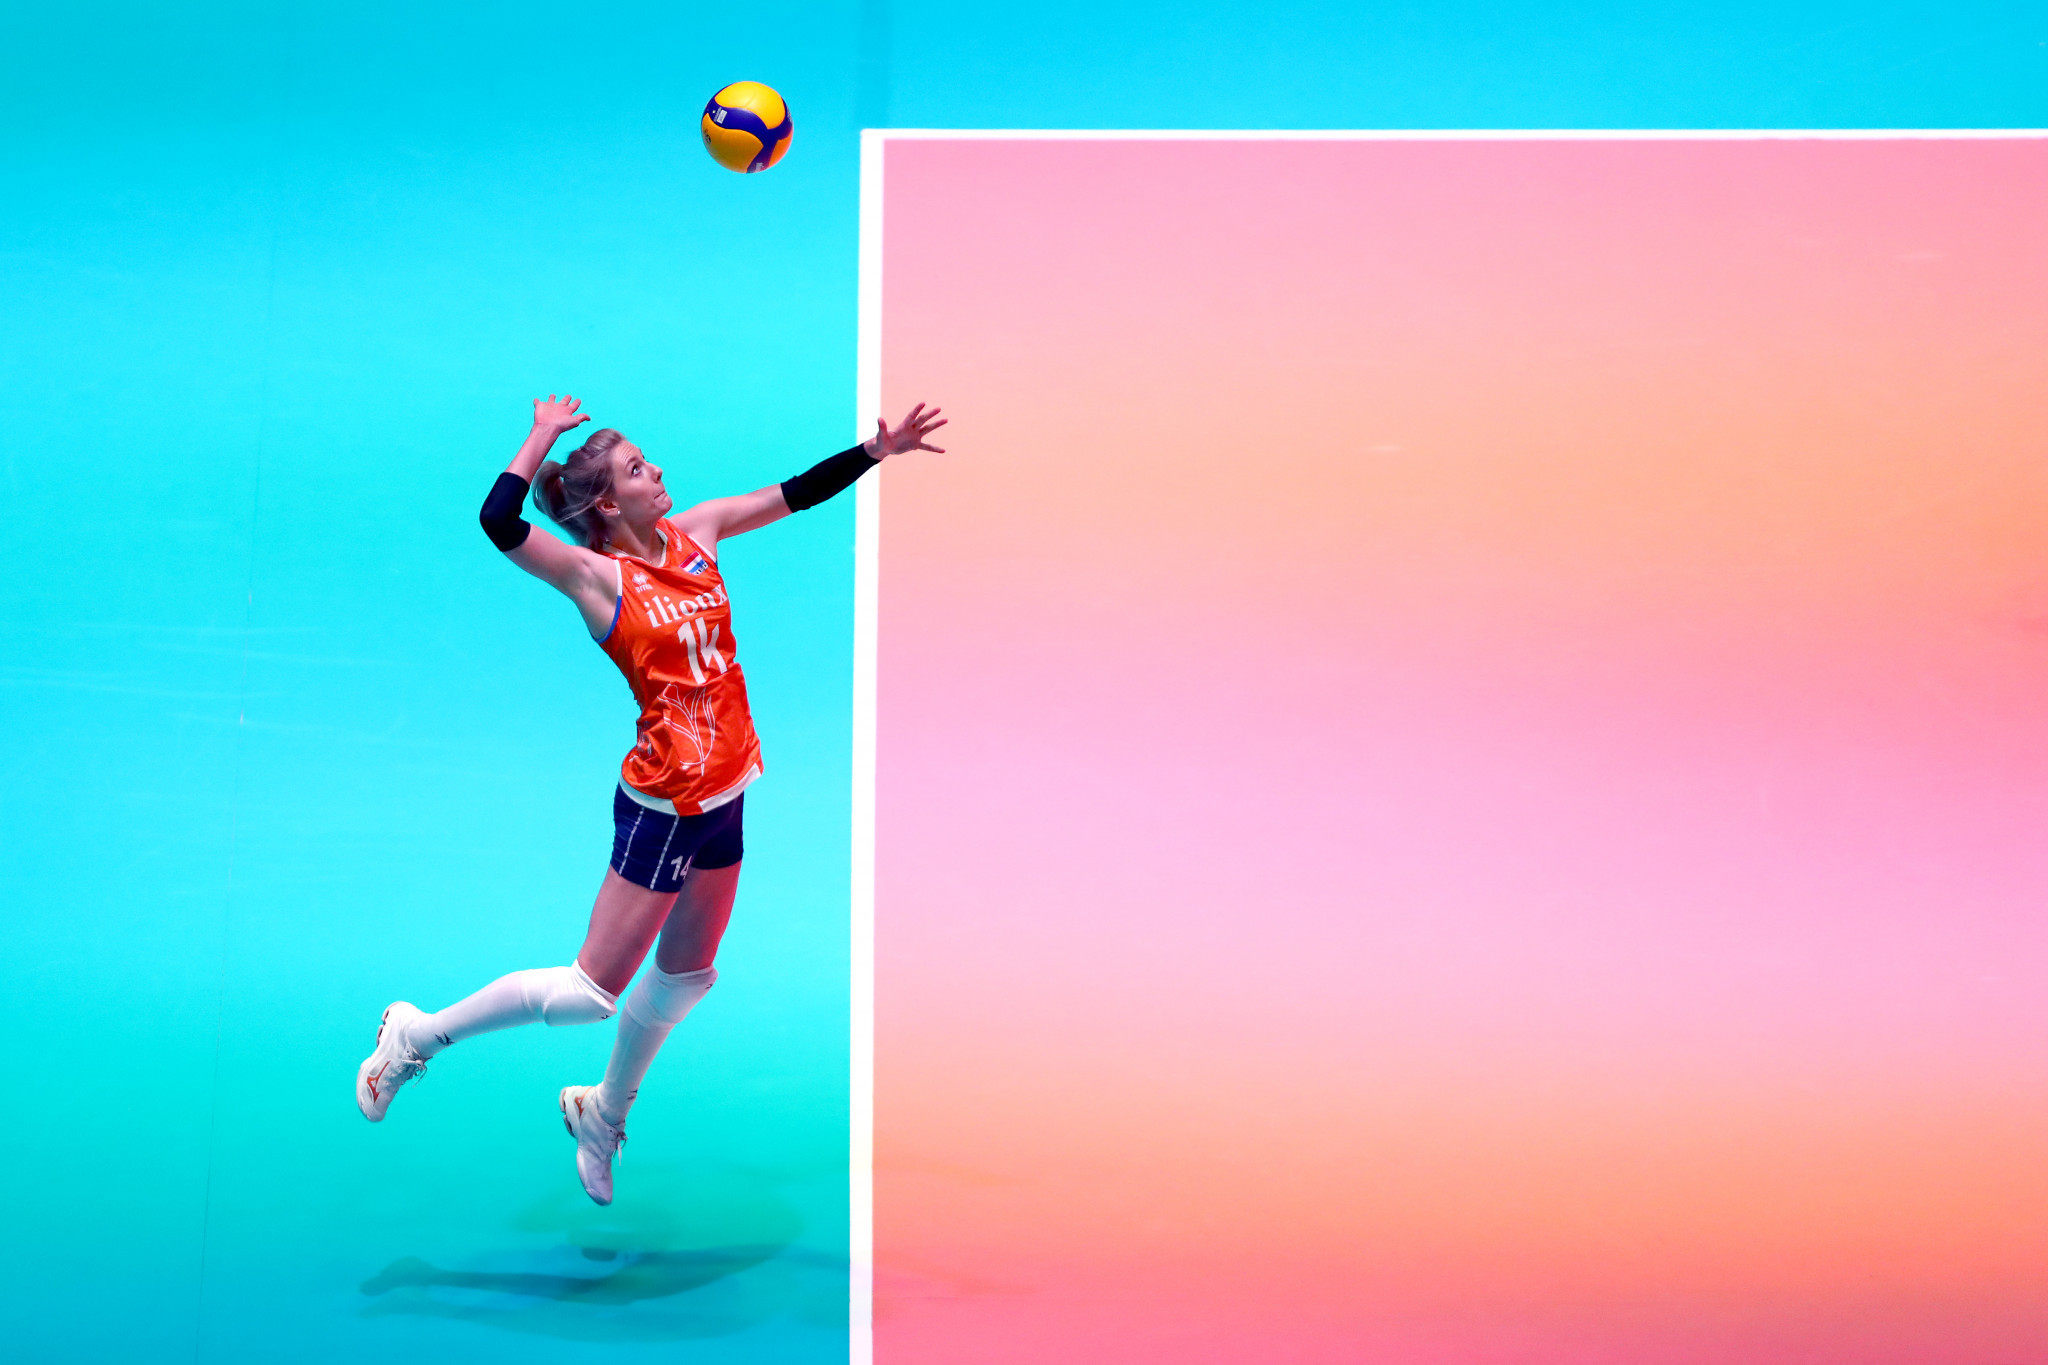 The Netherlands and Turkey advance to Women's EuroVolley 2021 semi-finals with dominant displays